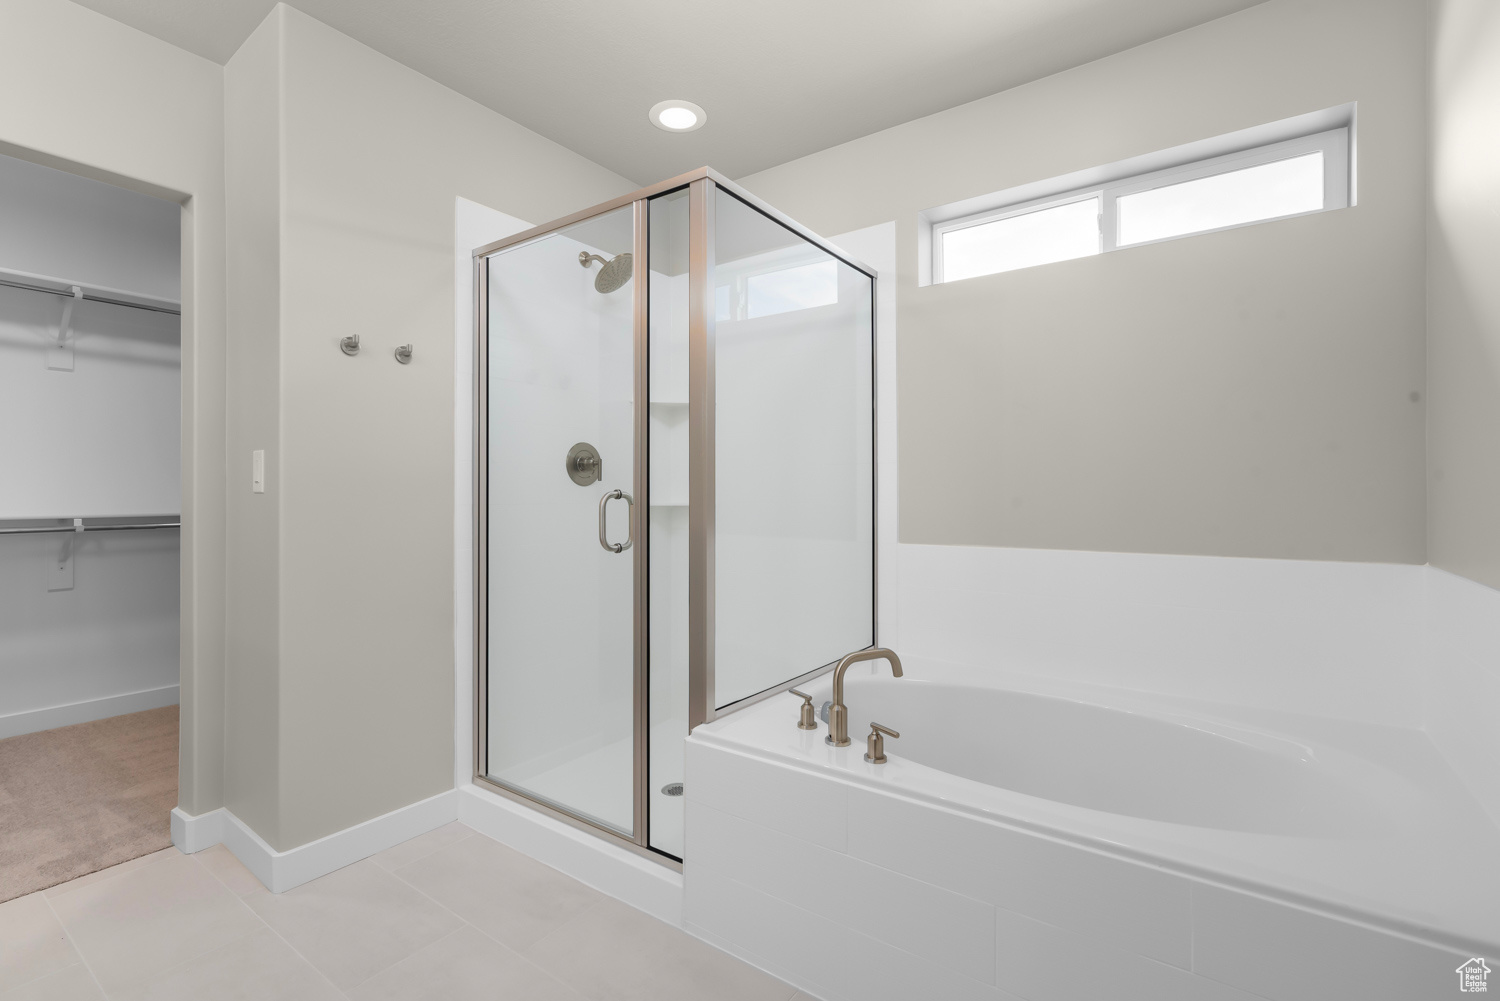 Bathroom with separate shower and tub and tile floors